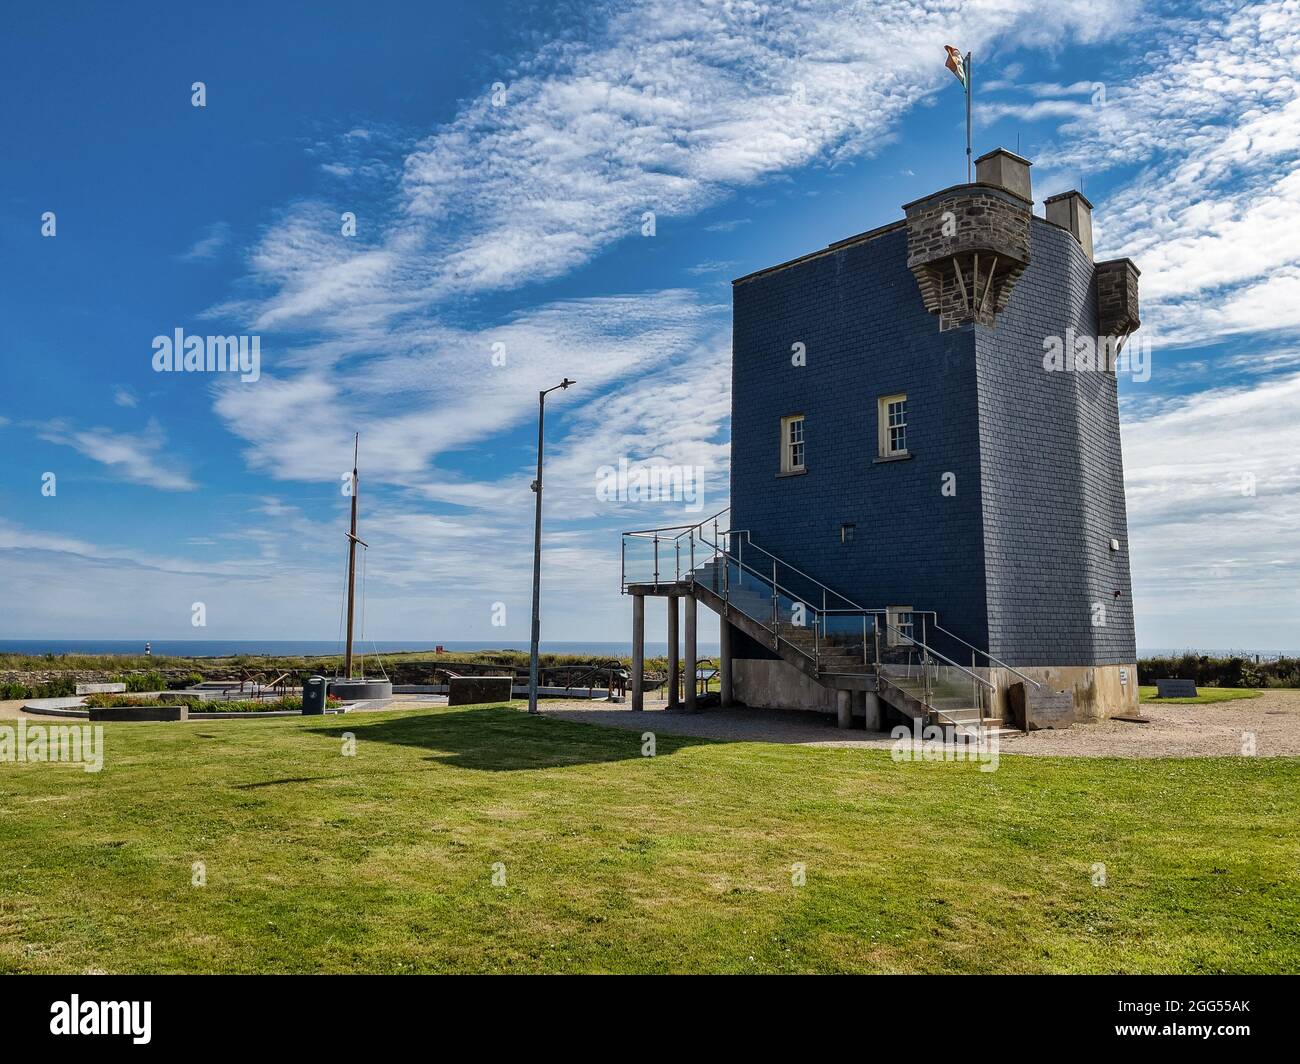 Old Head, Ireland- July 13, 2021: The look out tower at the Old Head of Kinsale County Cork Ireland Stock Photo